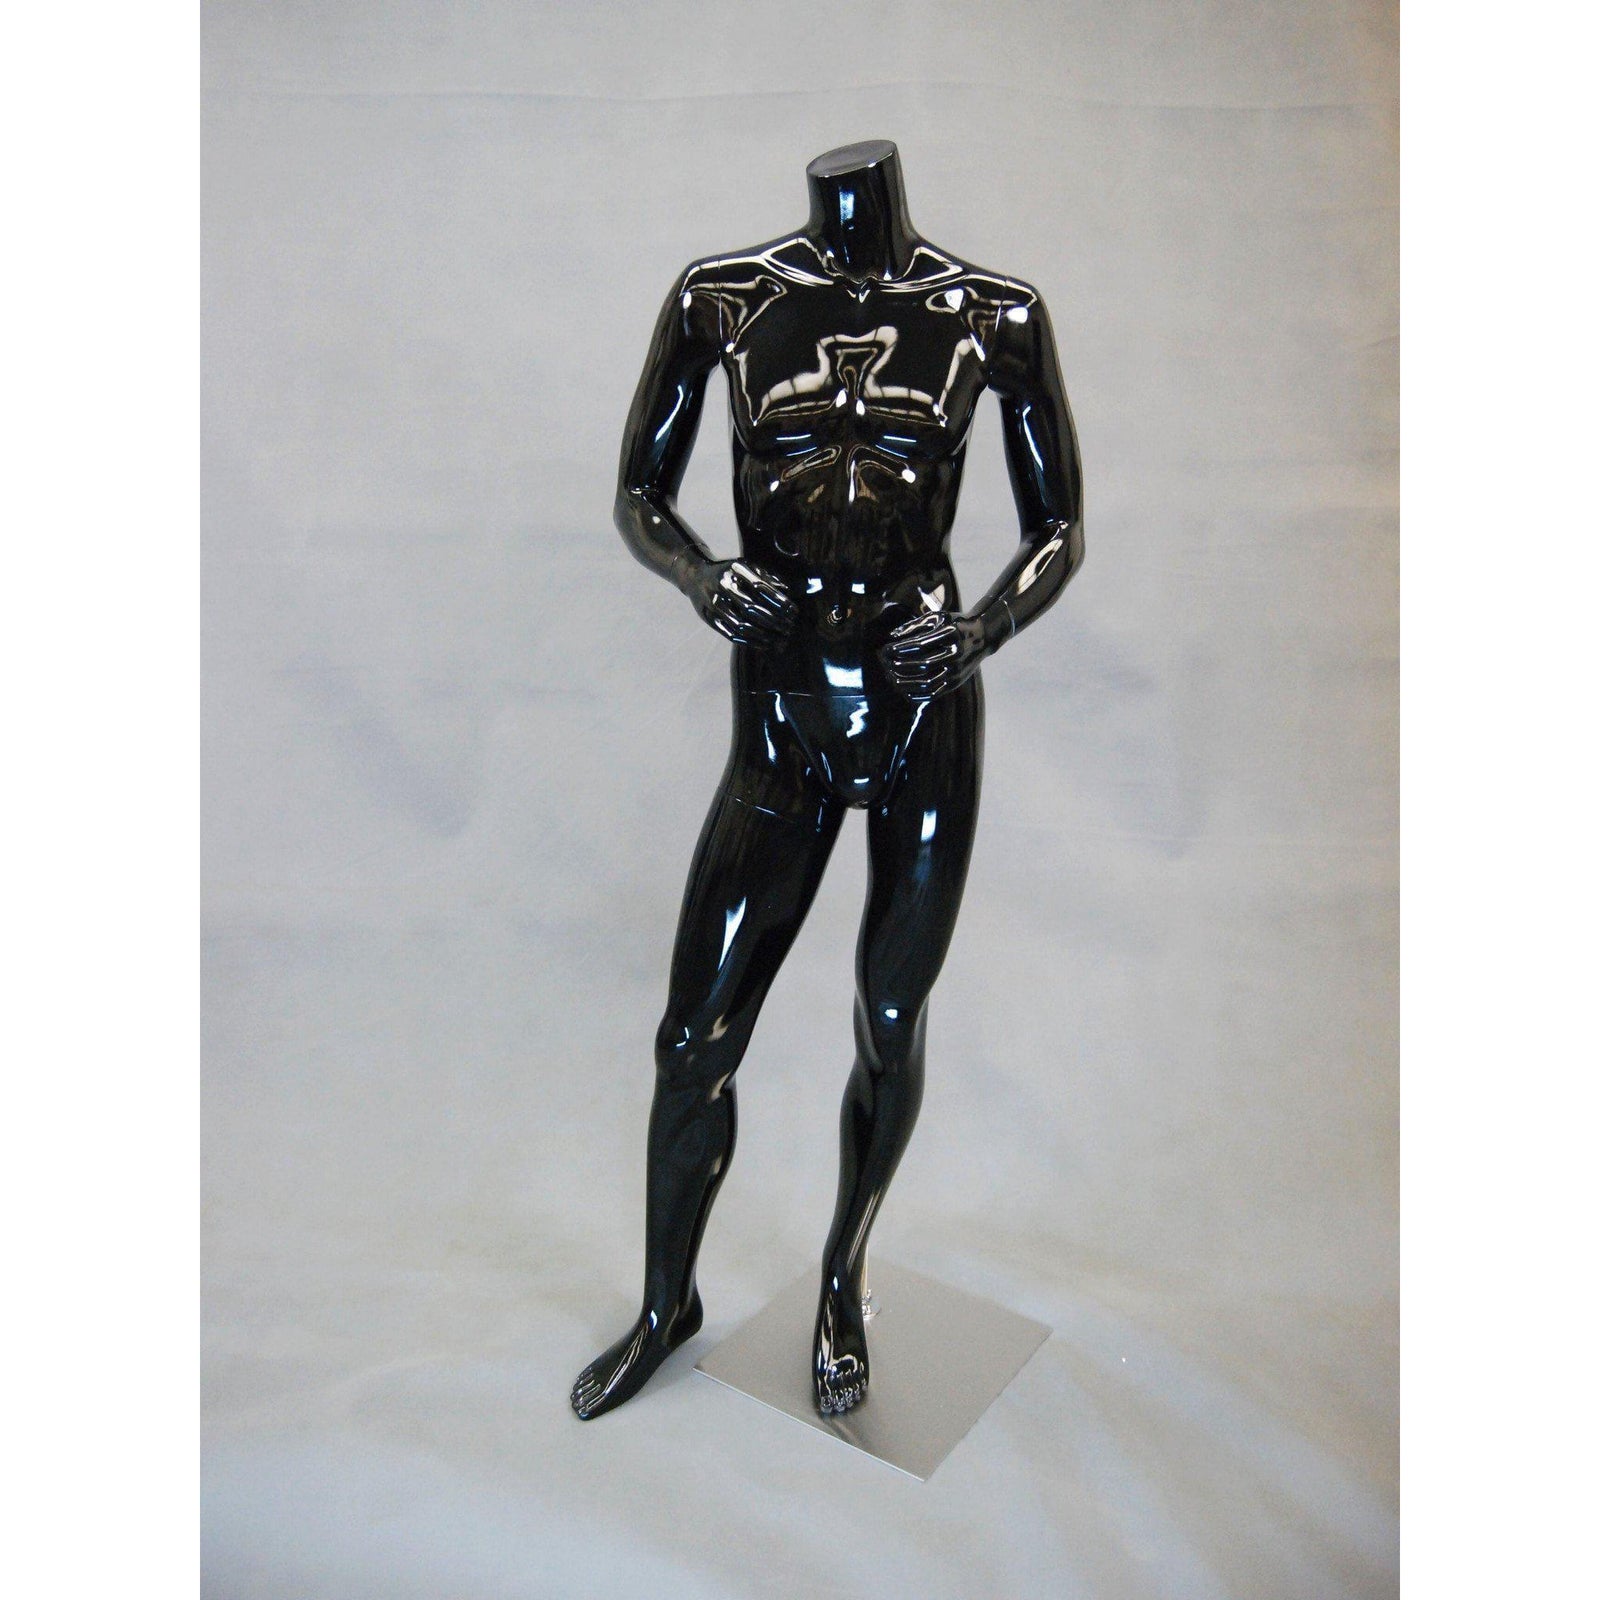 Male Invisible Ghost Mannequin Full Body (Version 1.0) MM-MZGH3